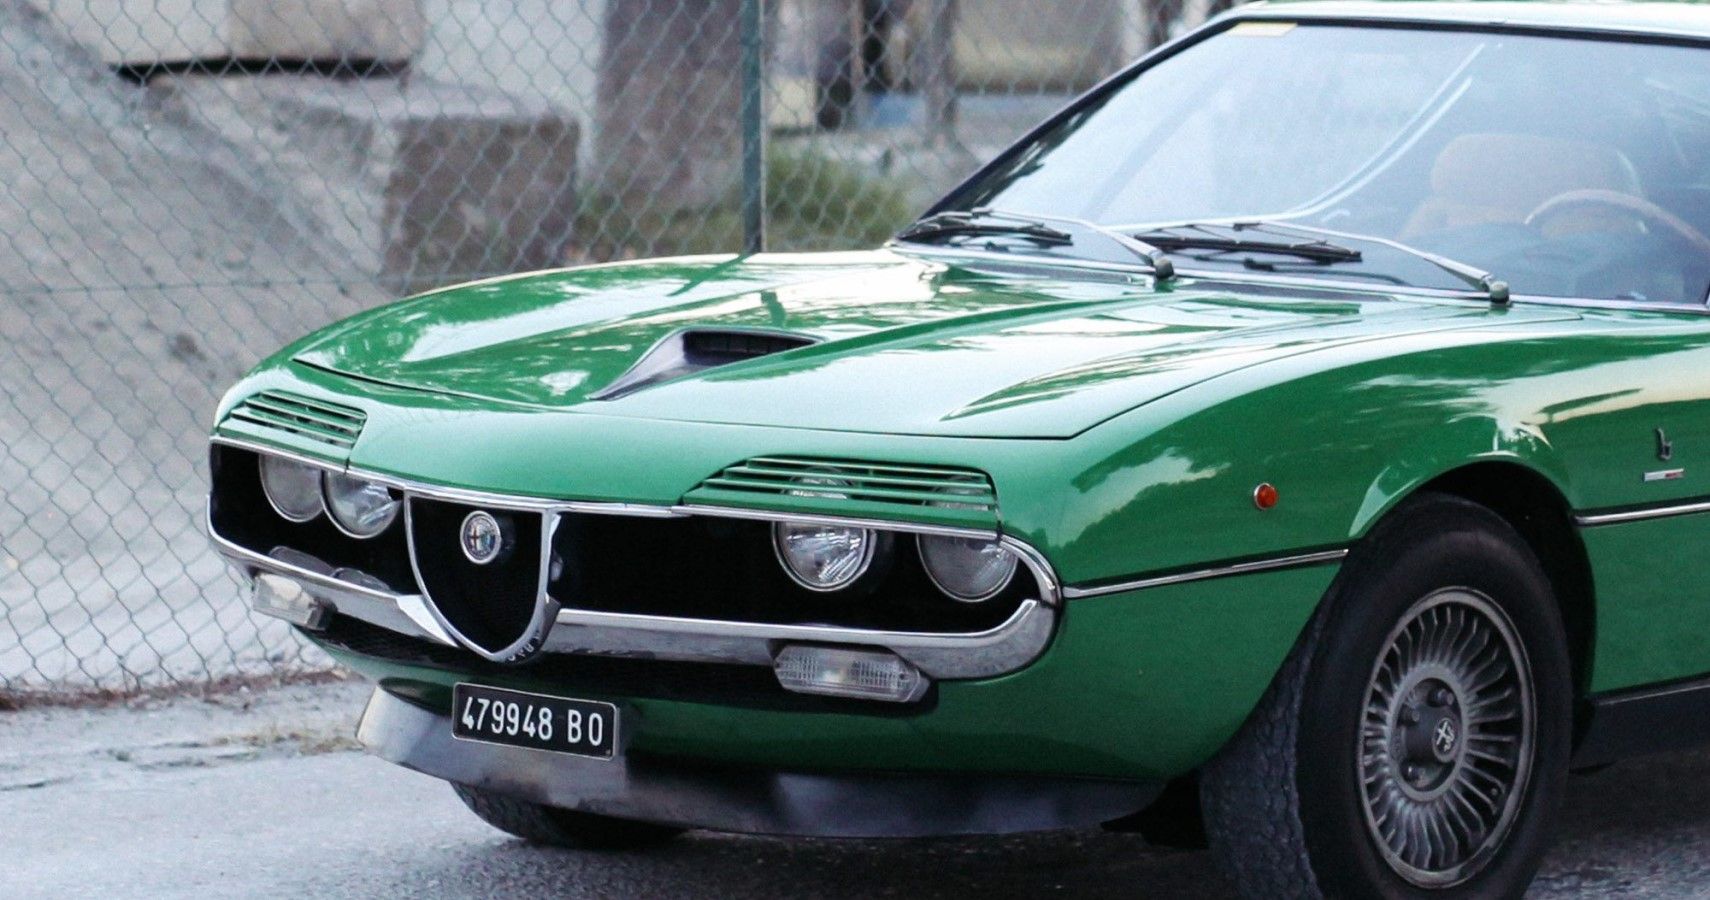 Alfa Romeo Montreal came with a cool headlamp cover